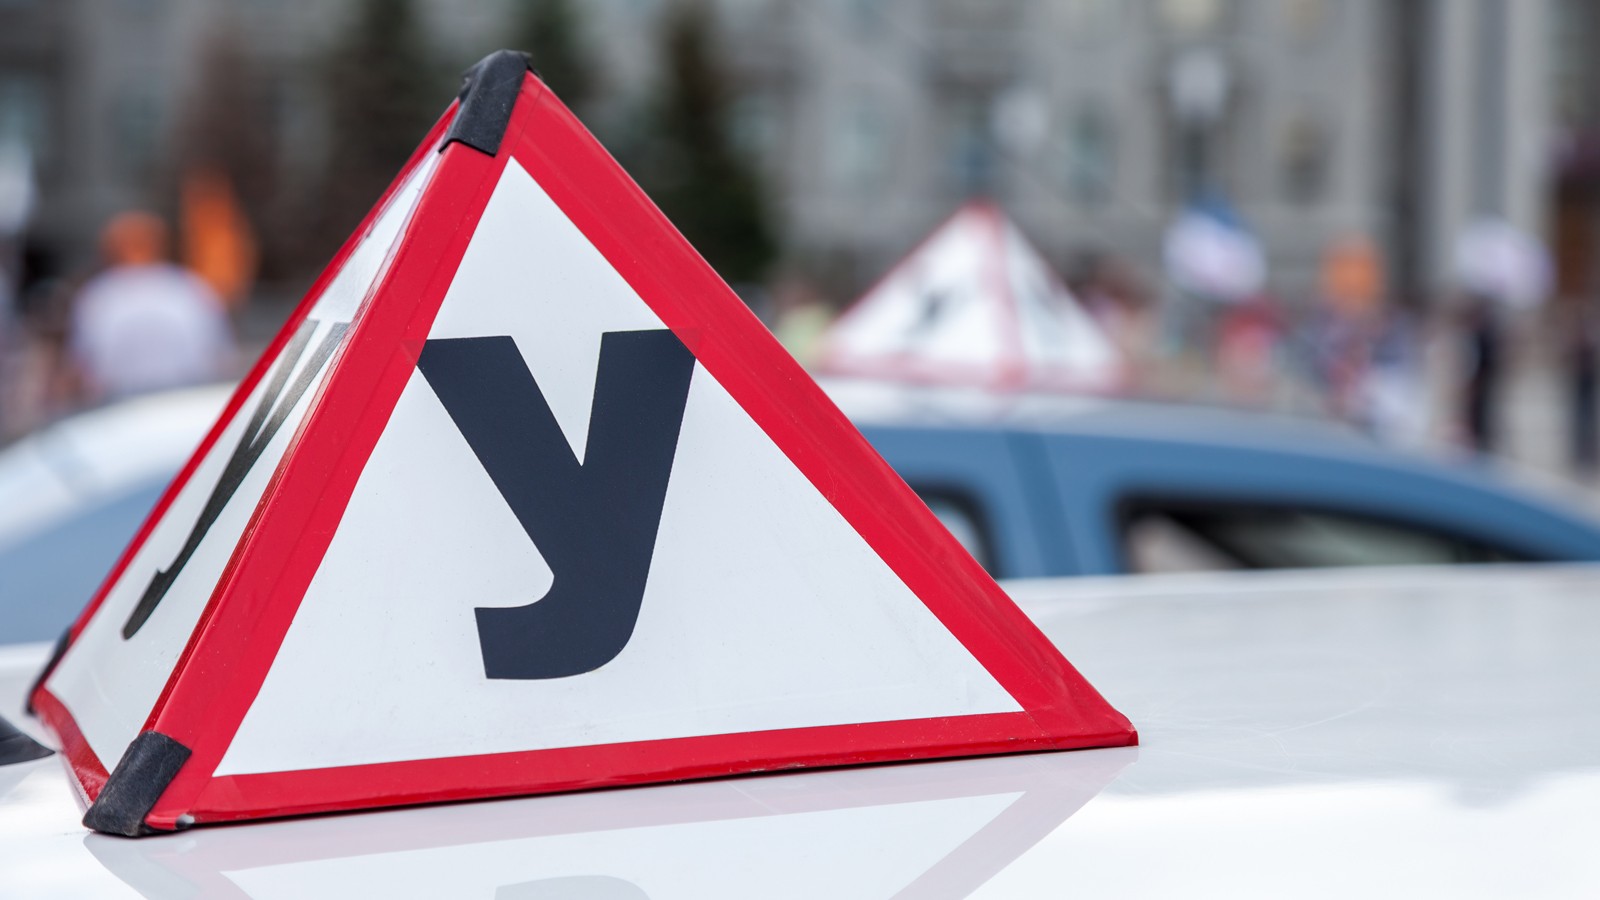 Sign of a Russian Driving School on top of the vehicle